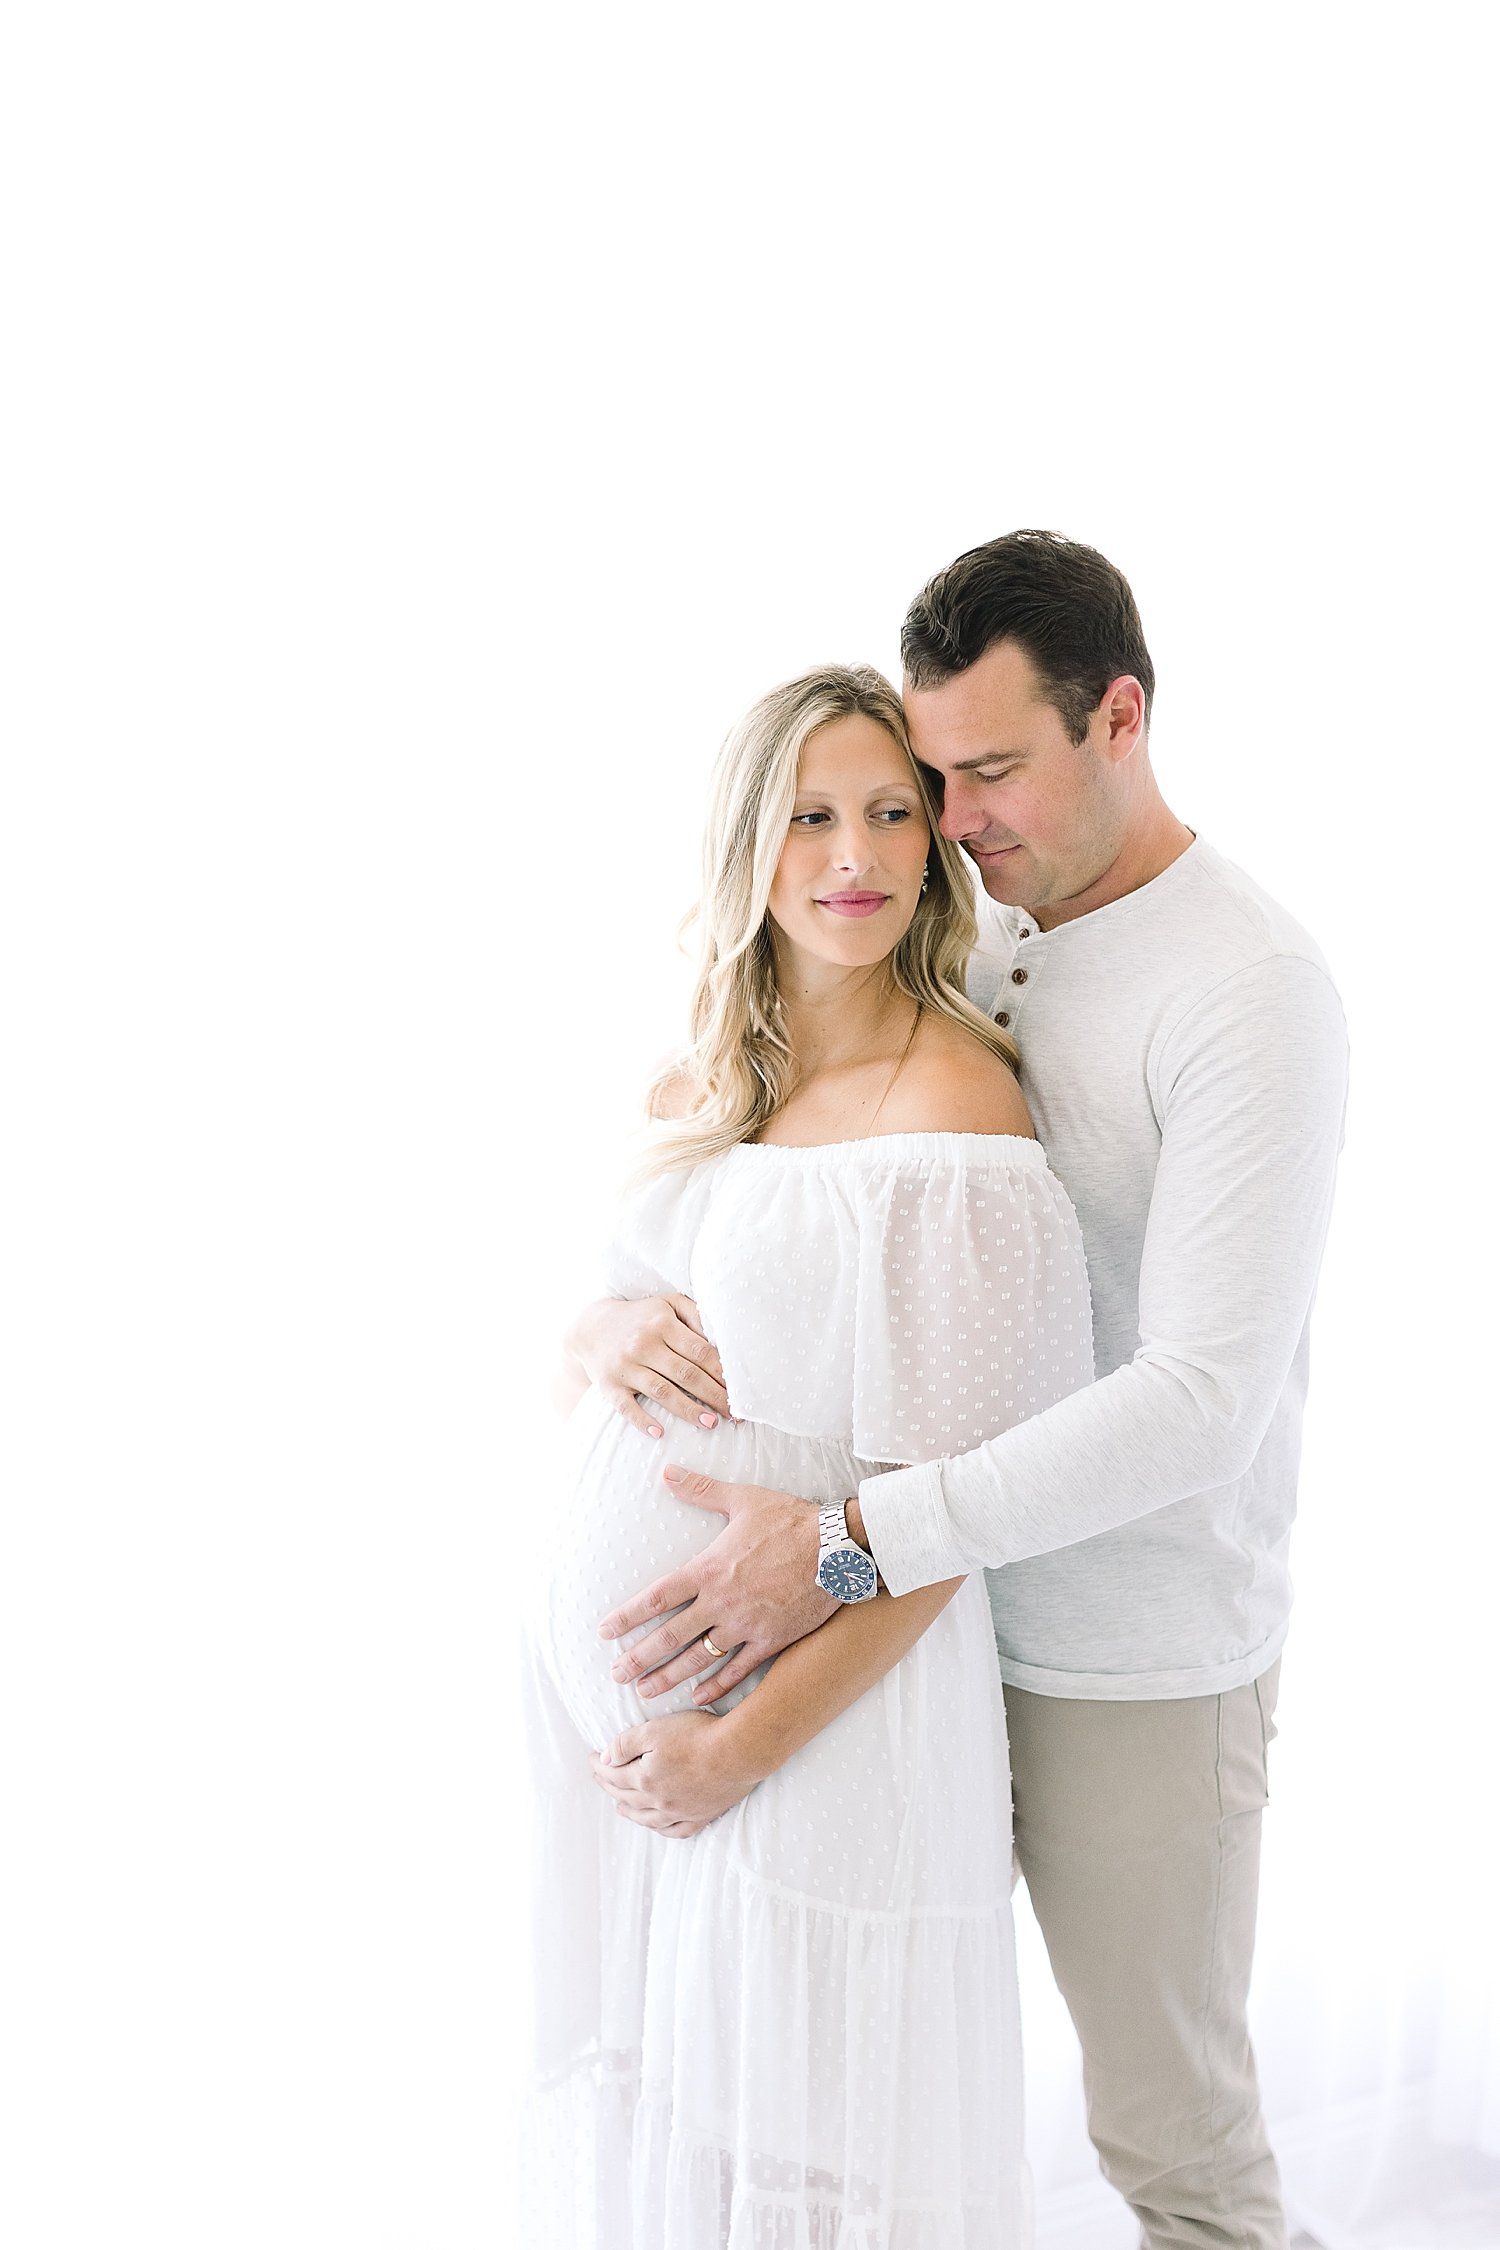 Studio maternity session for expecting parents | Ambre Williams Photography